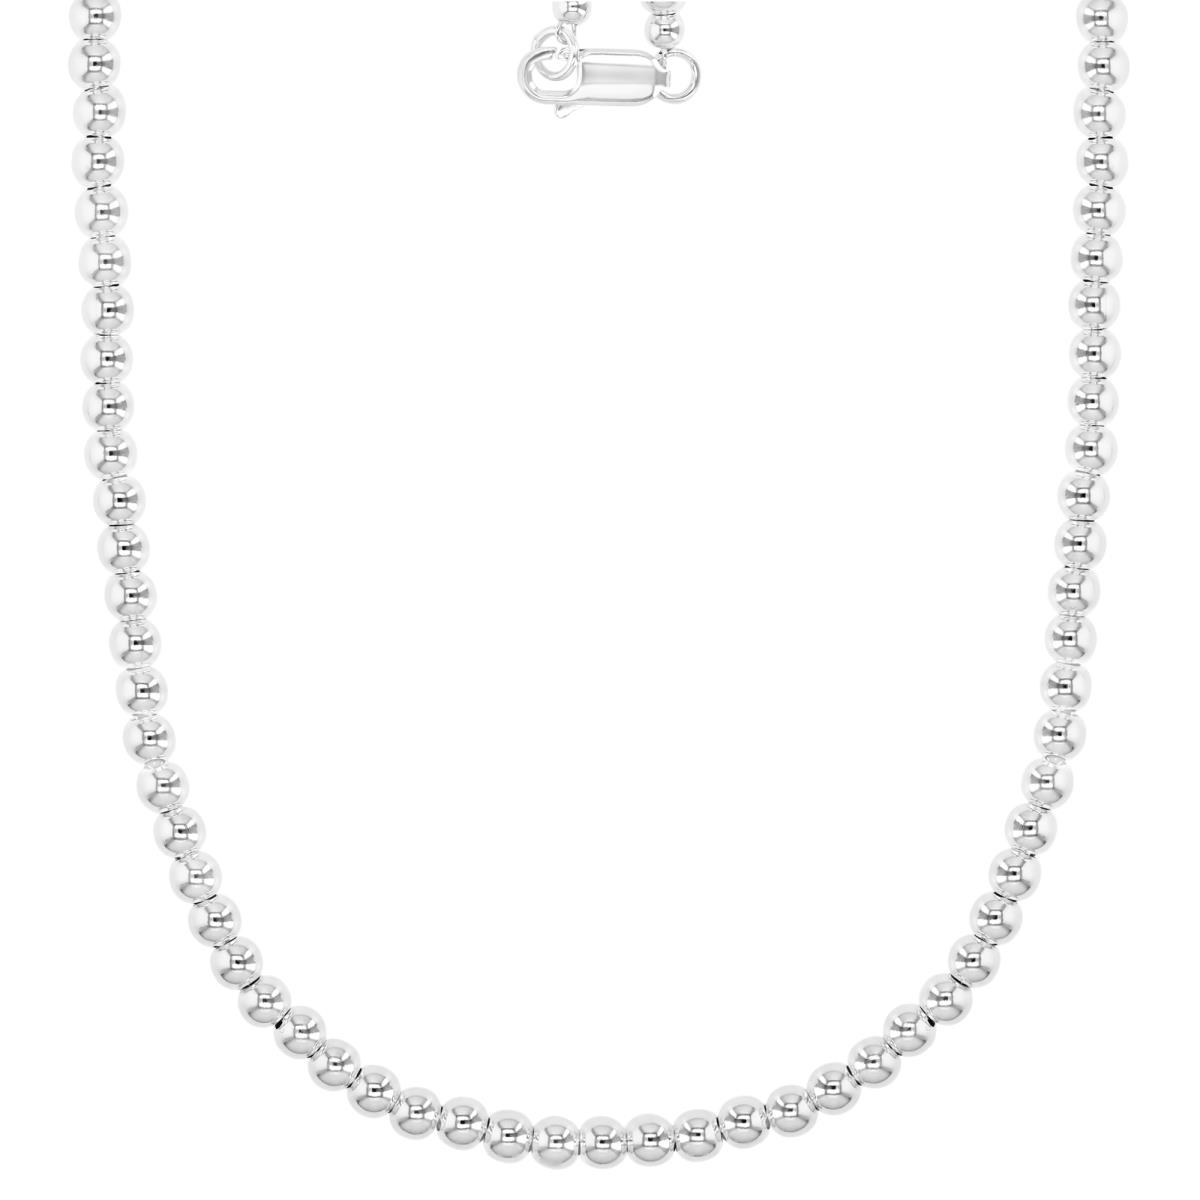 Sterling Silver Anti-Tarnish 3.8 Ball 20" Chain Necklace